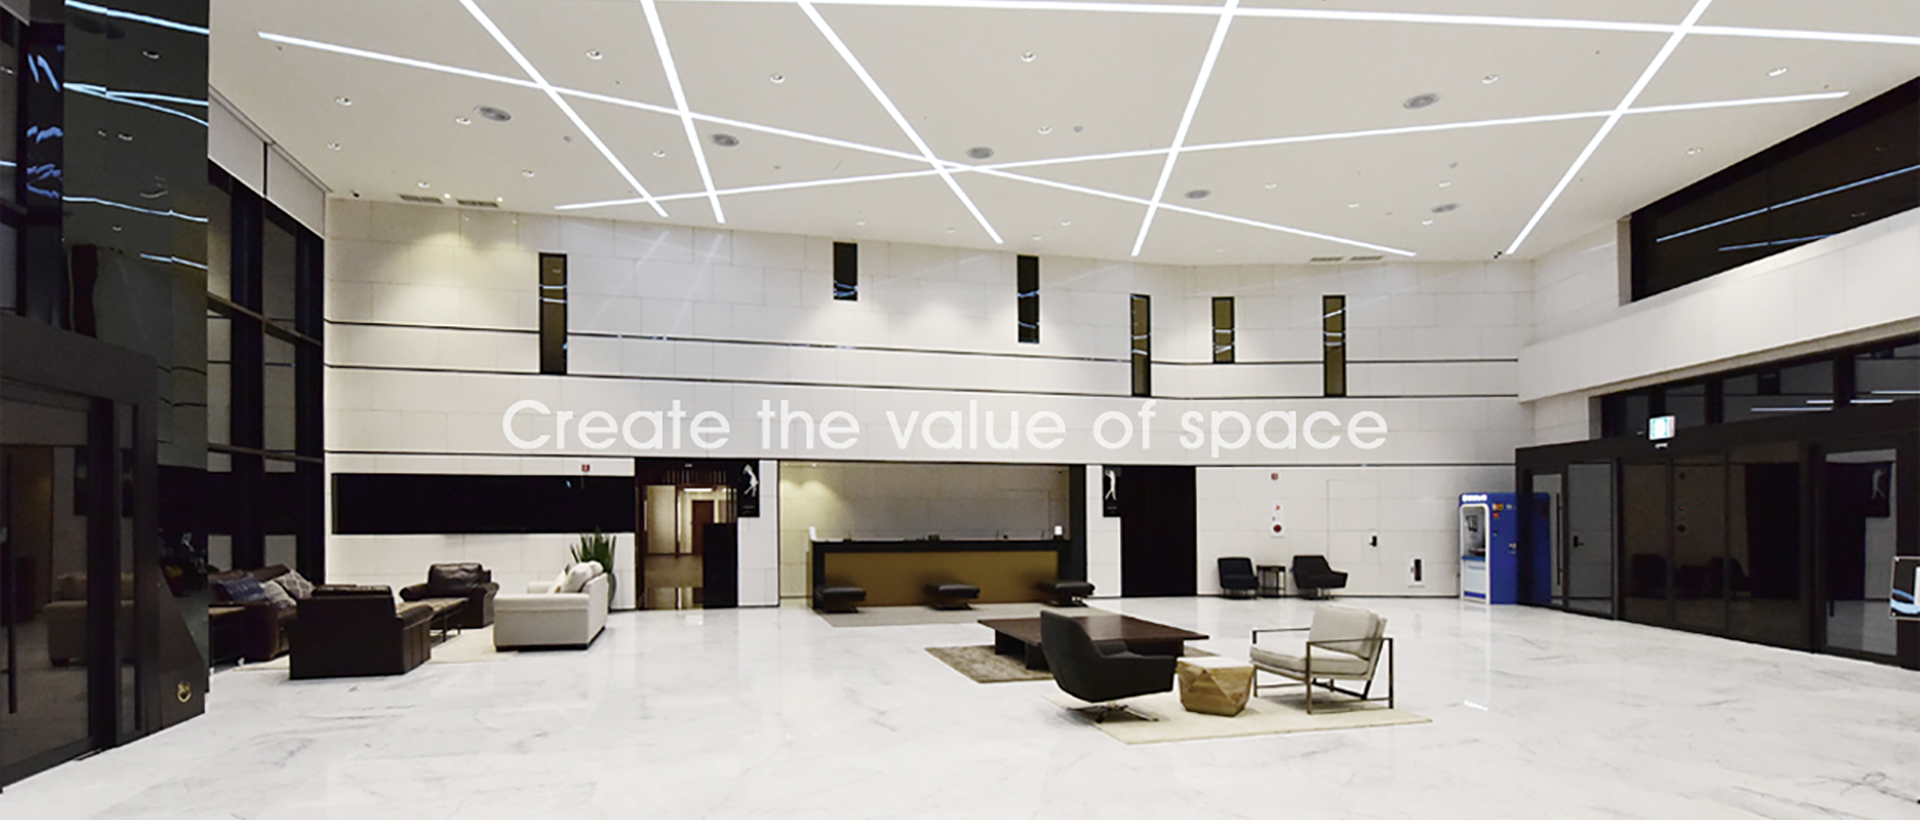 Create the value of space